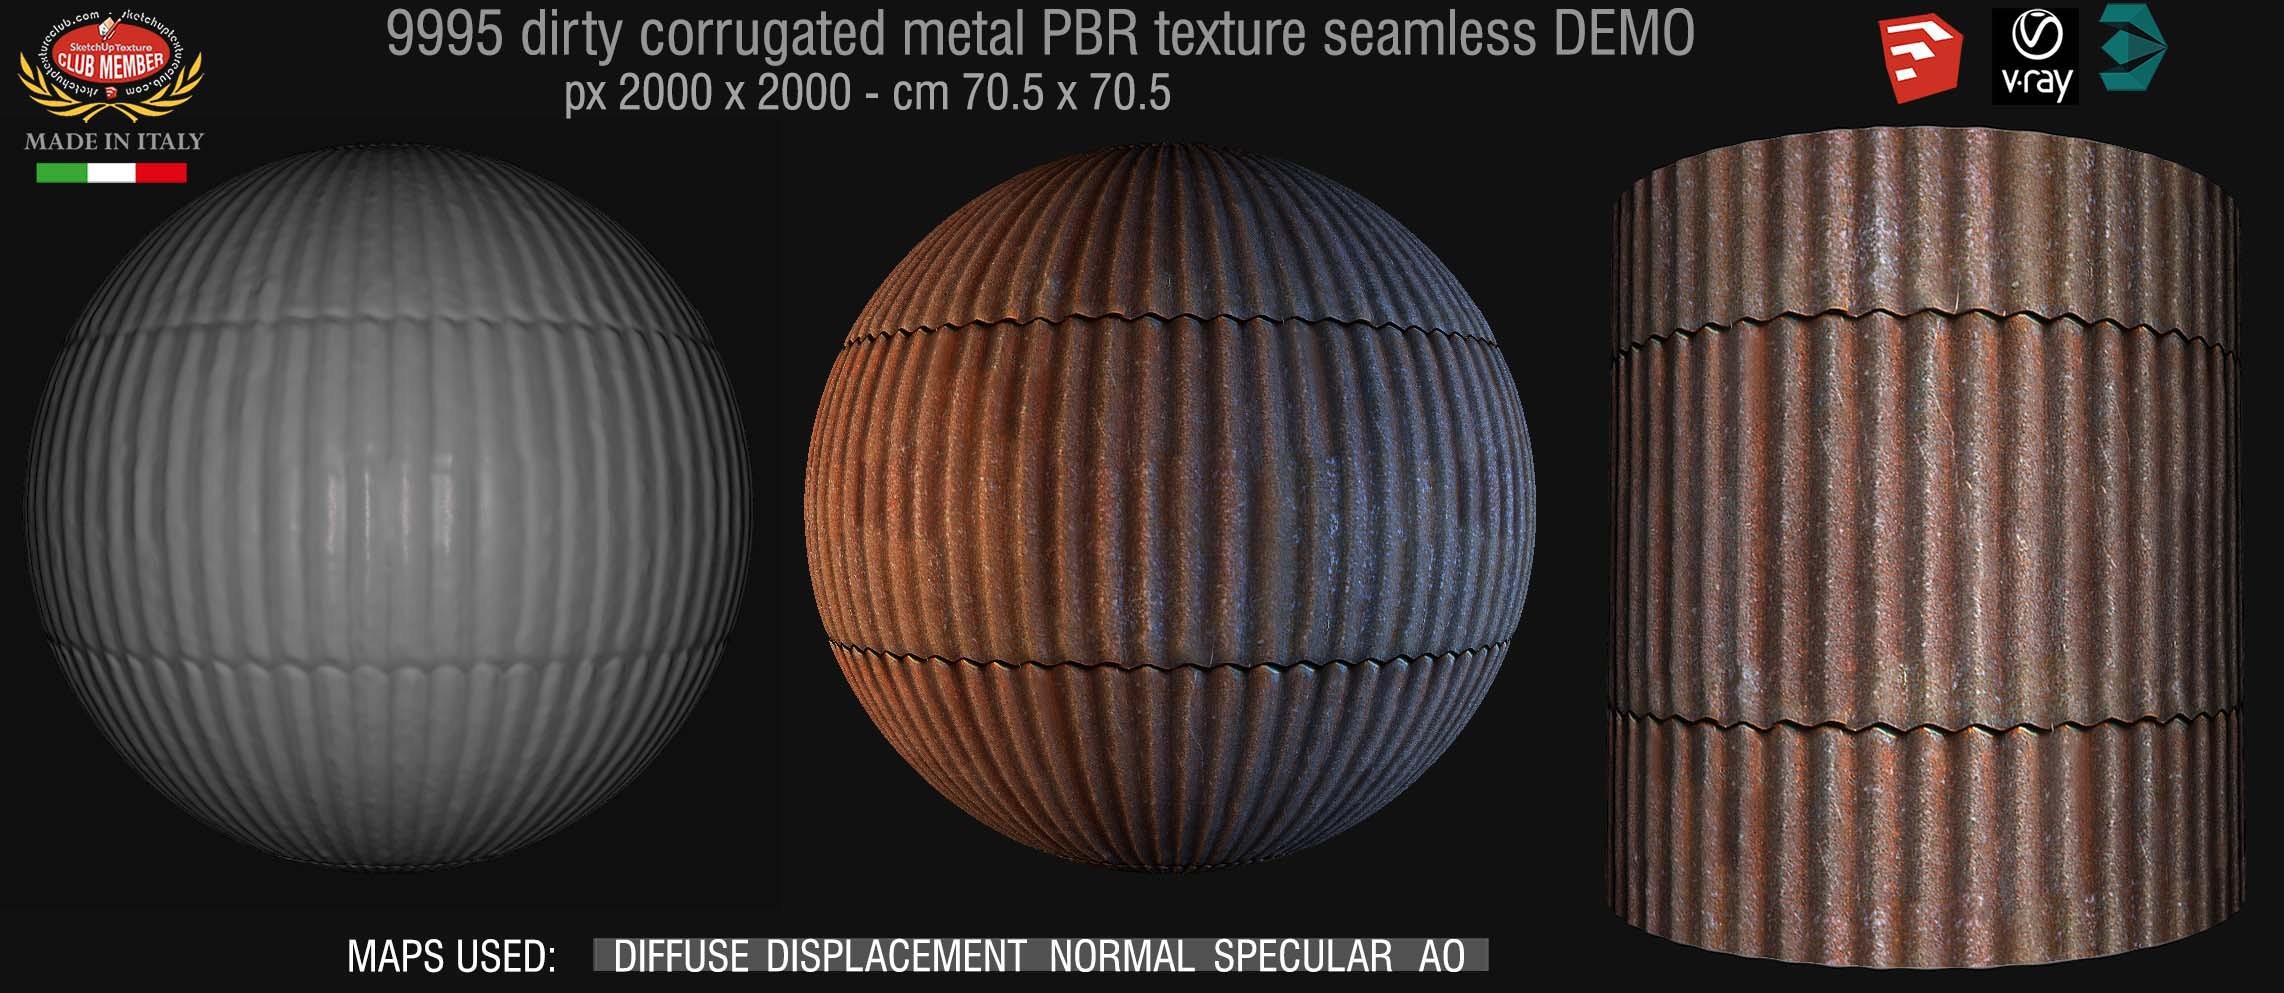 09995 Dirty corrugated metal PBR texture seamless DEMO